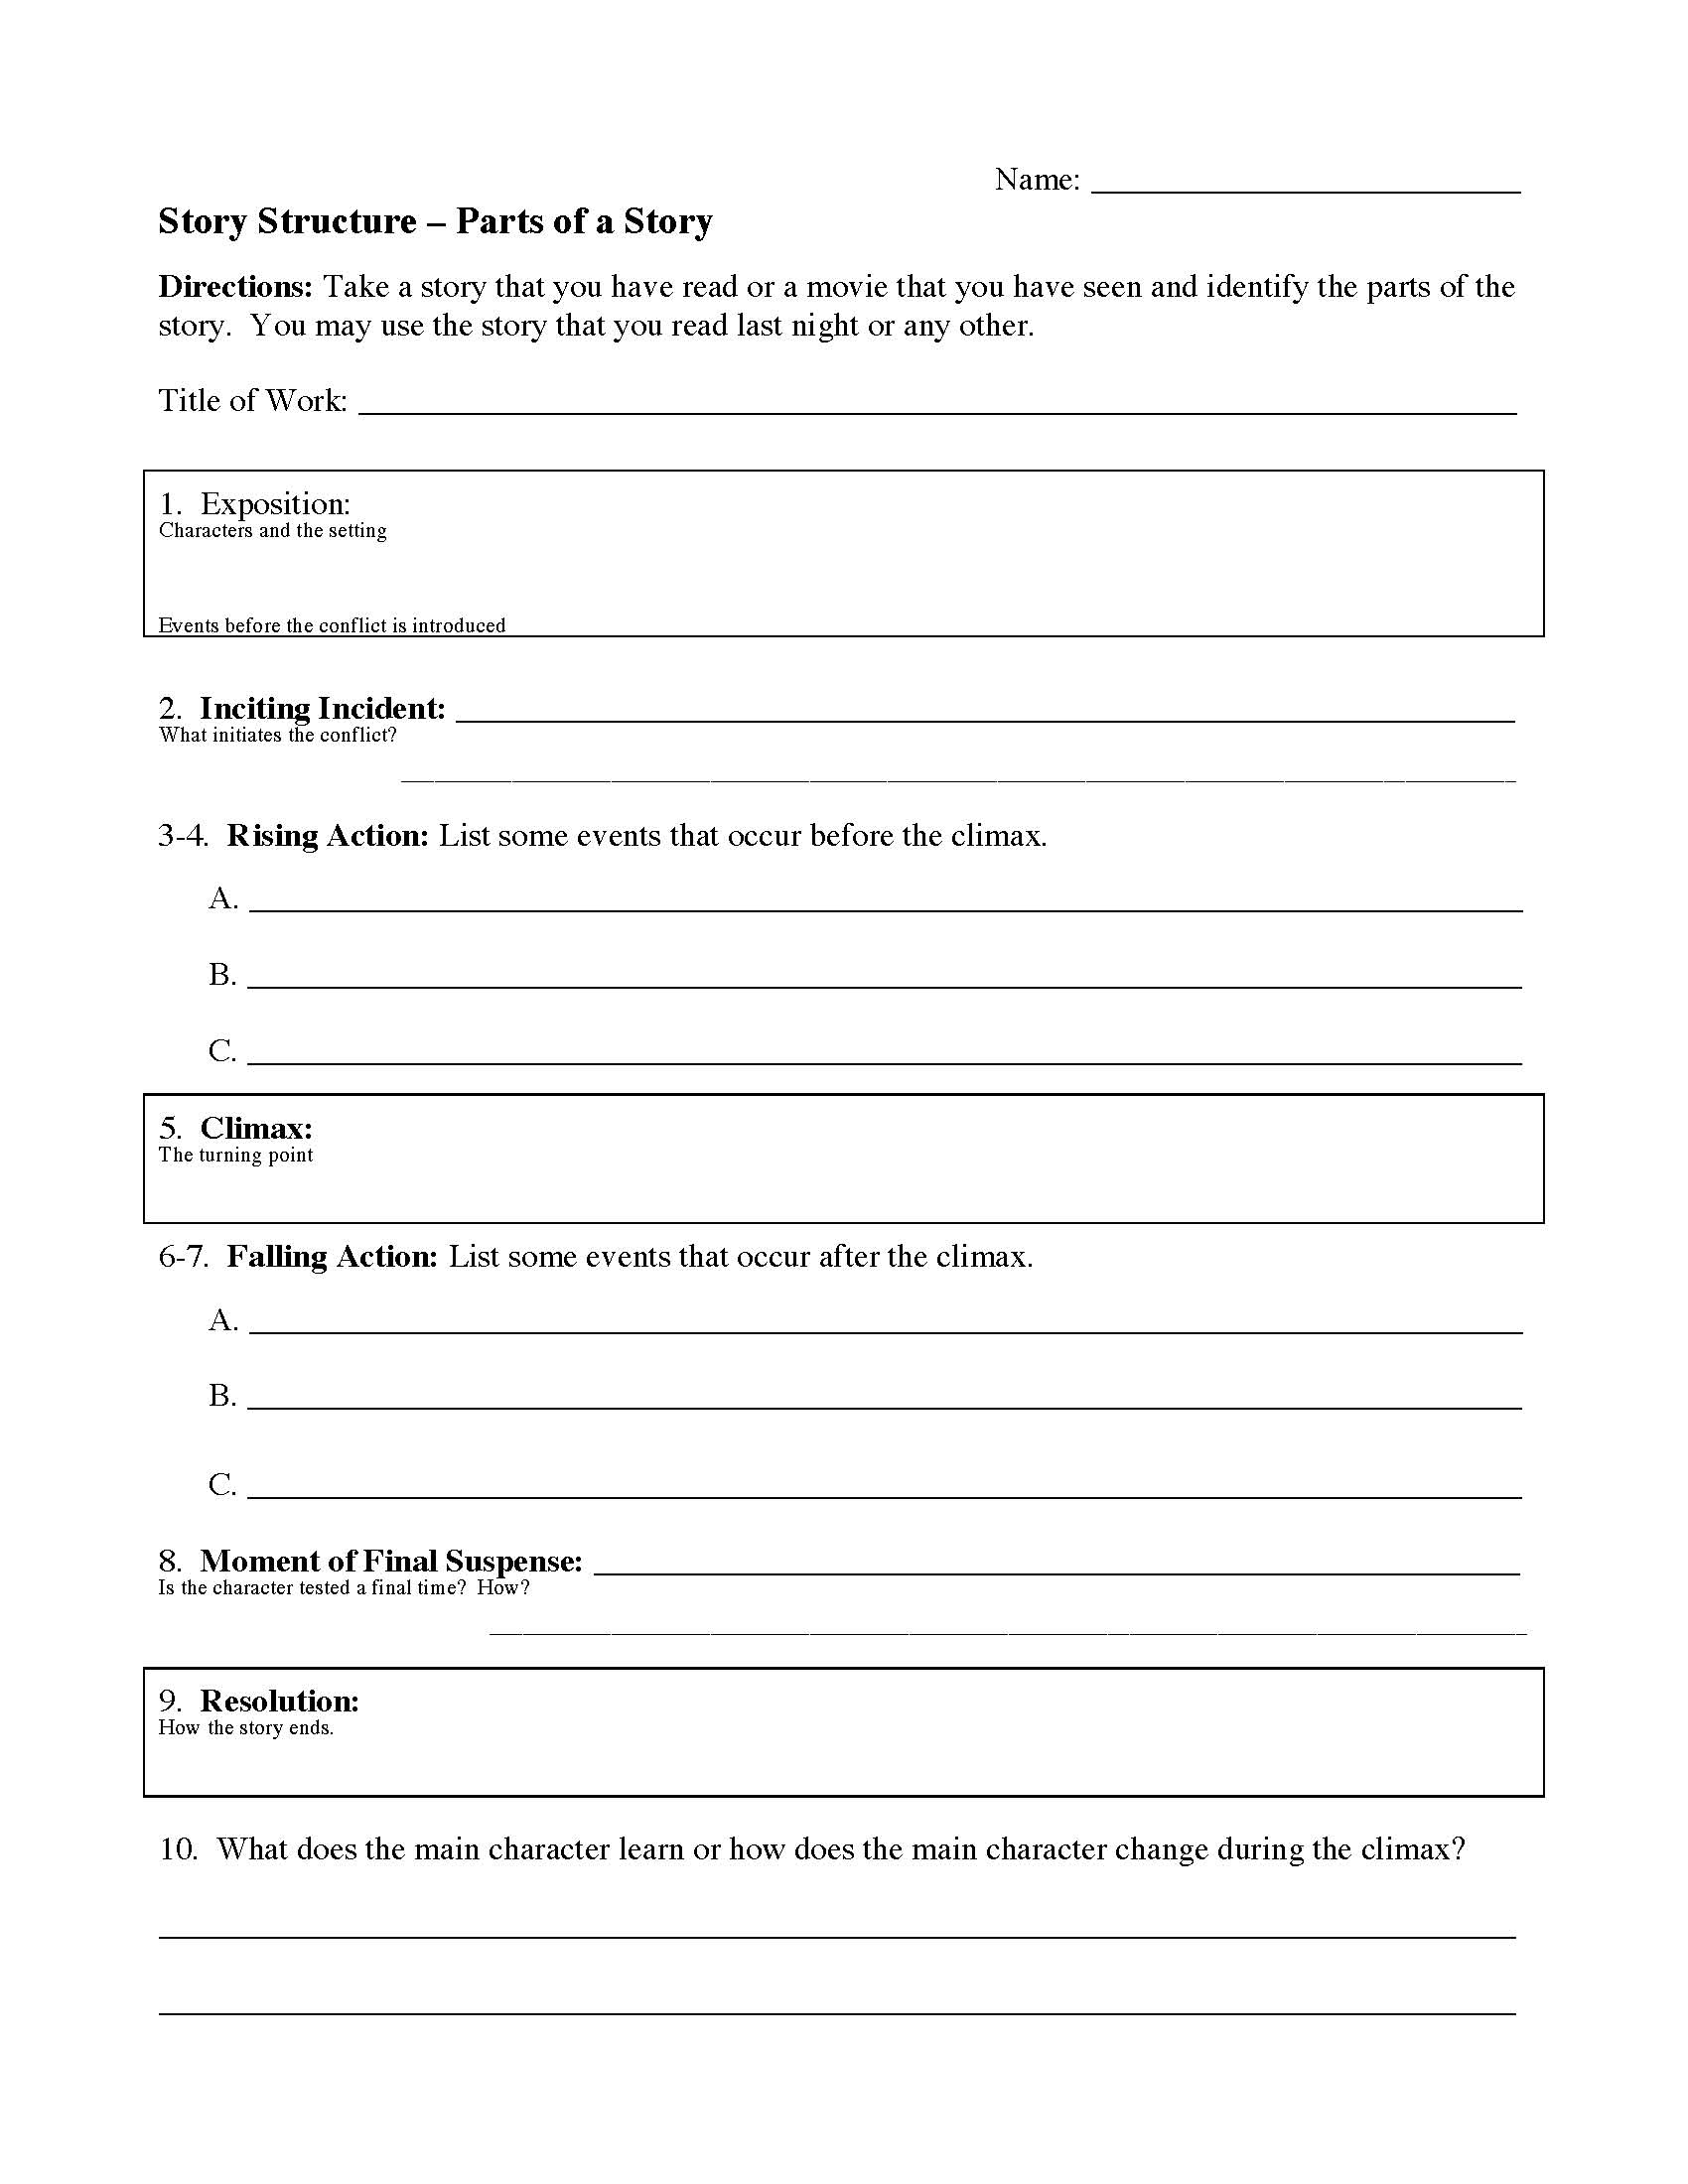 Story Structure Worksheet Template  Reading Activity For Elements Of A Story Worksheet